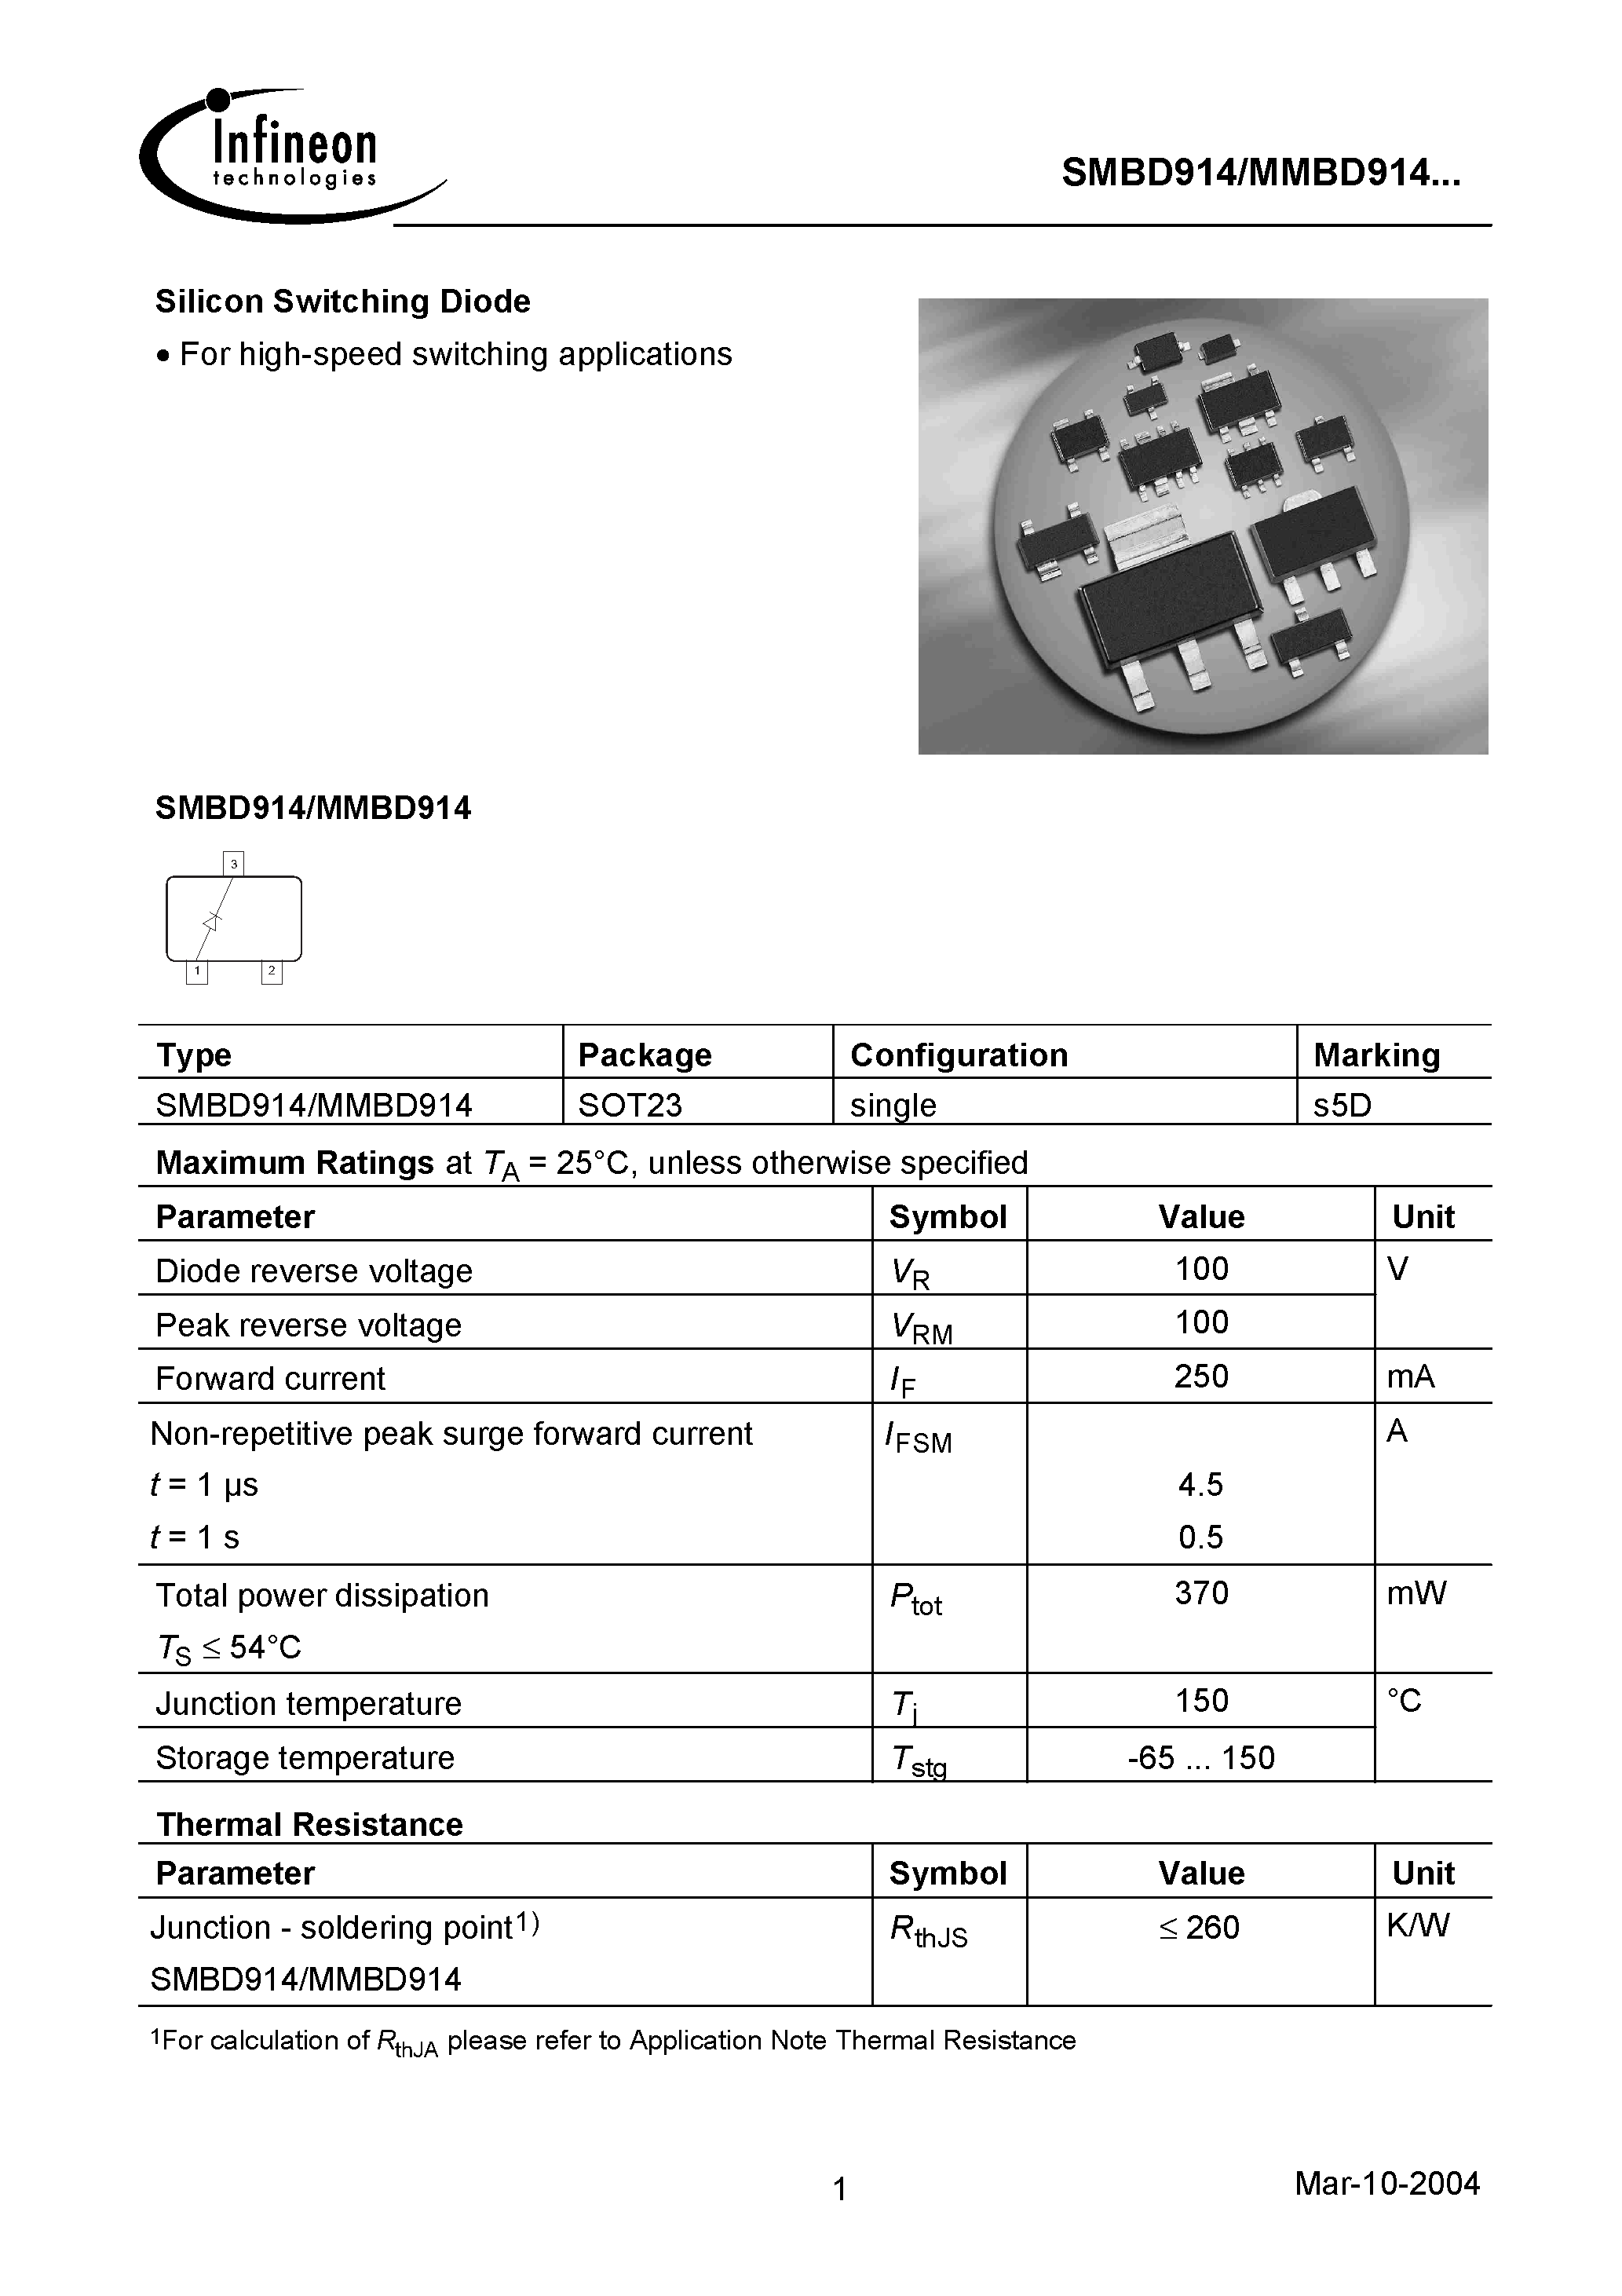 Datasheet MMBD914 - Silicon Switching Diode page 1